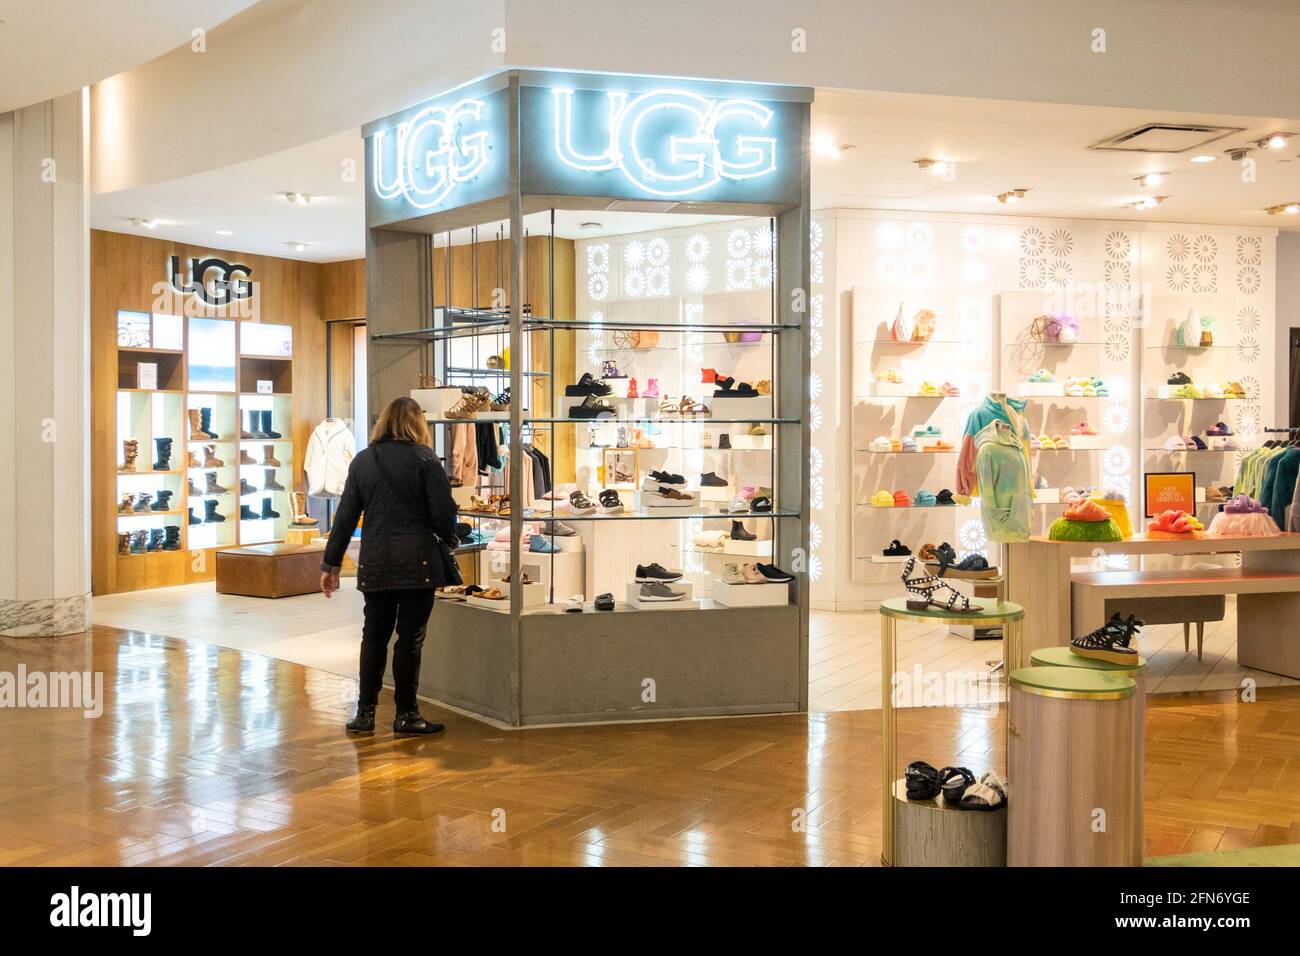 Ugg shoe section in Macy's flagship department store in New York City, USA  Stock Photo - Alamy